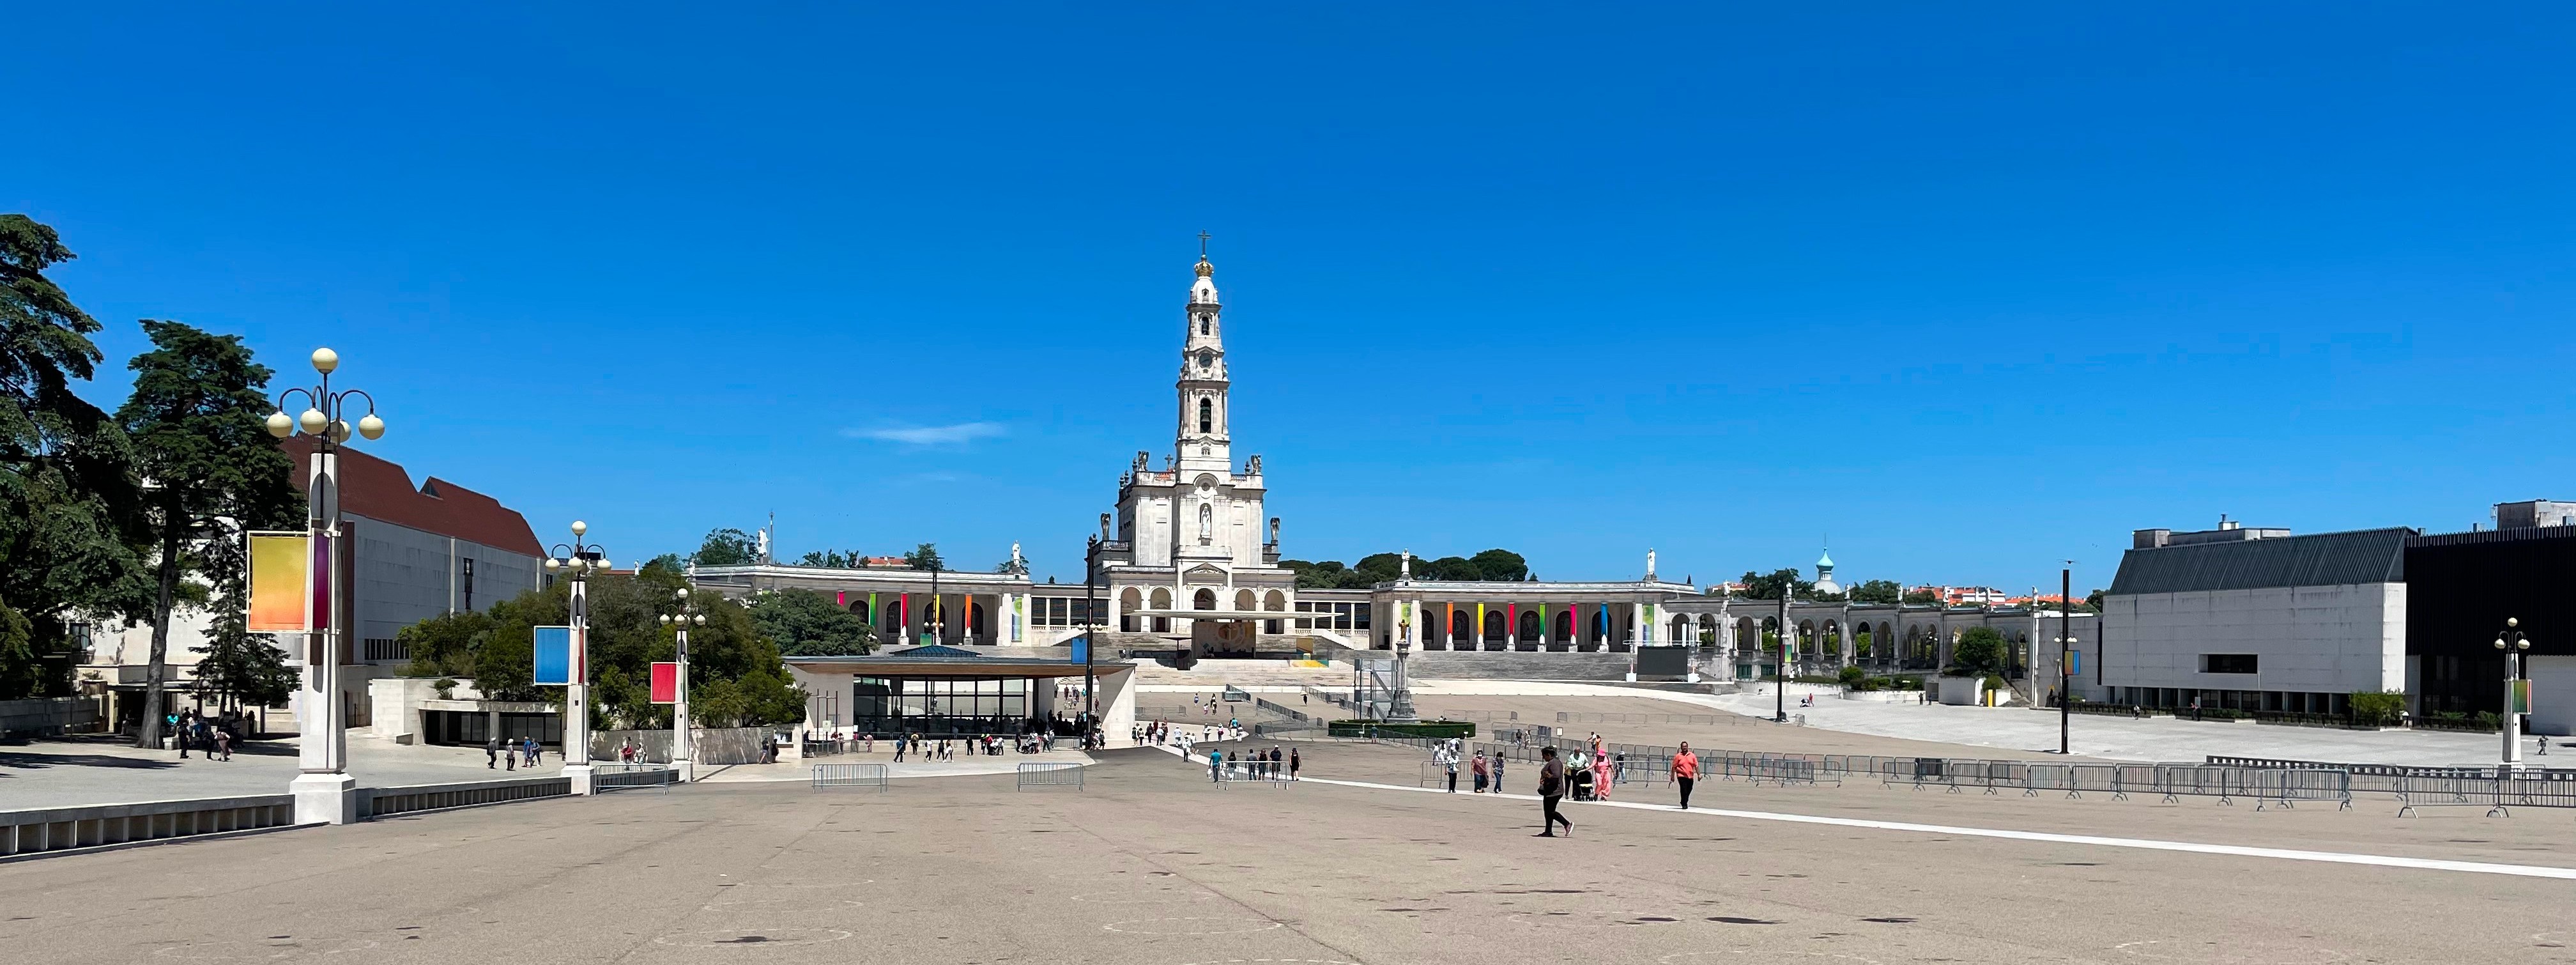 On the left is a shrine where Catholics make pilgrimages to light candles and such. The square is modeled very similar to the square in the Vatican and has been visited by the Pope multiple times.